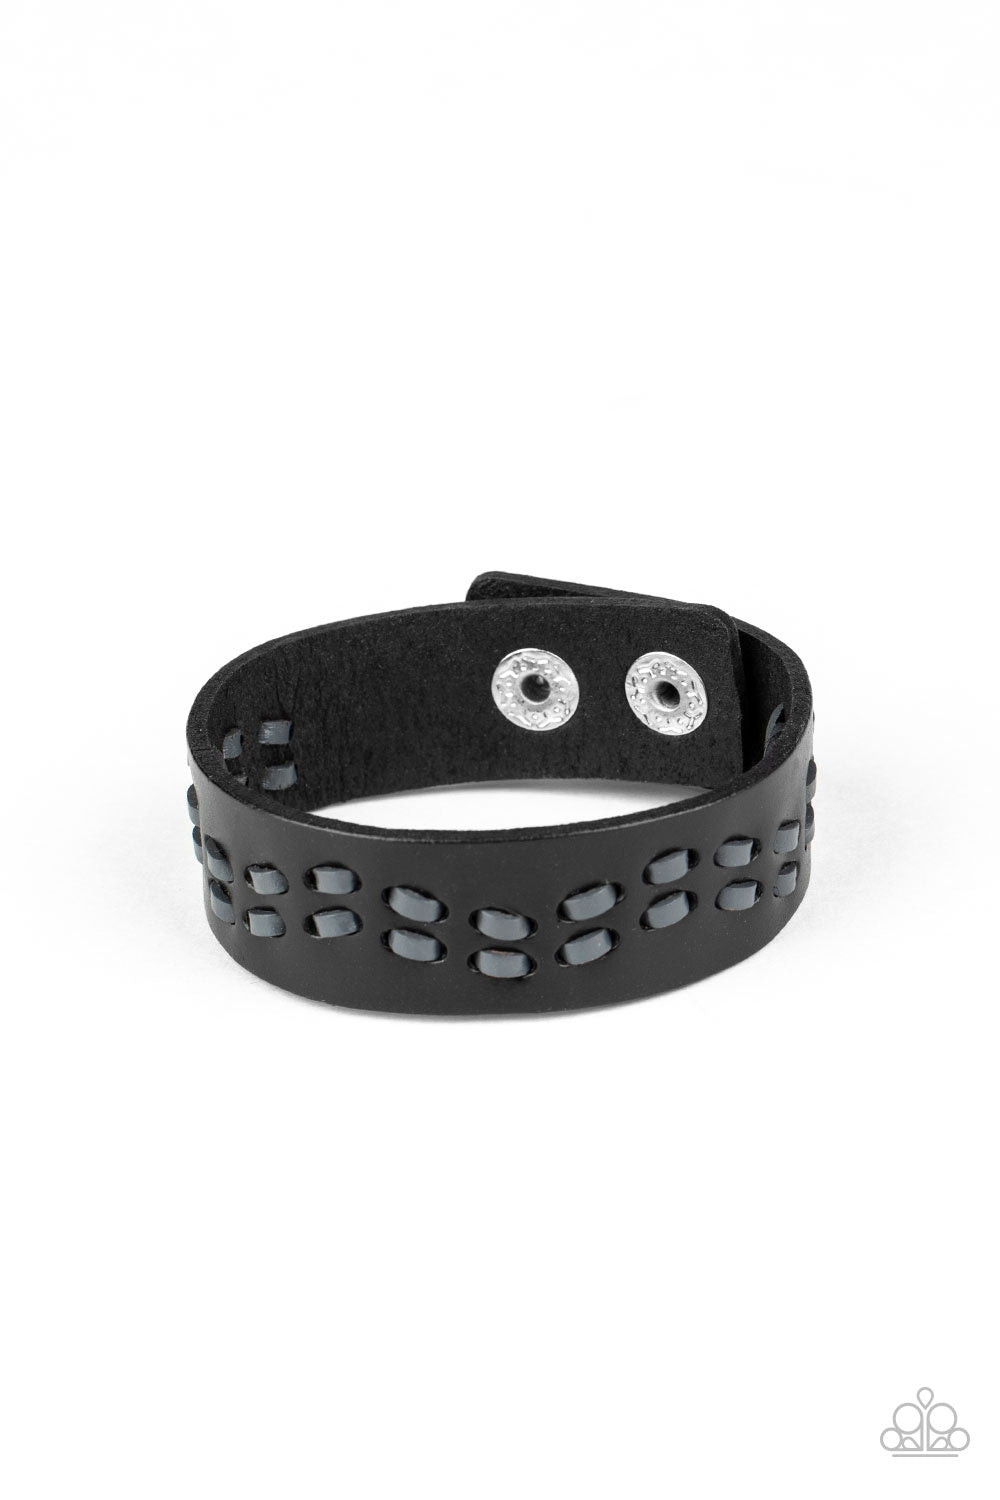 Leather Is My Favorite Color - Black Urban Bracelet - Paparazzi Accessories - Black leather cording is haphazardly laced through the center of a black leather band, creating a rustic look around the wrist. Features an adjustable snap closure. Sold as one individual bracelet.